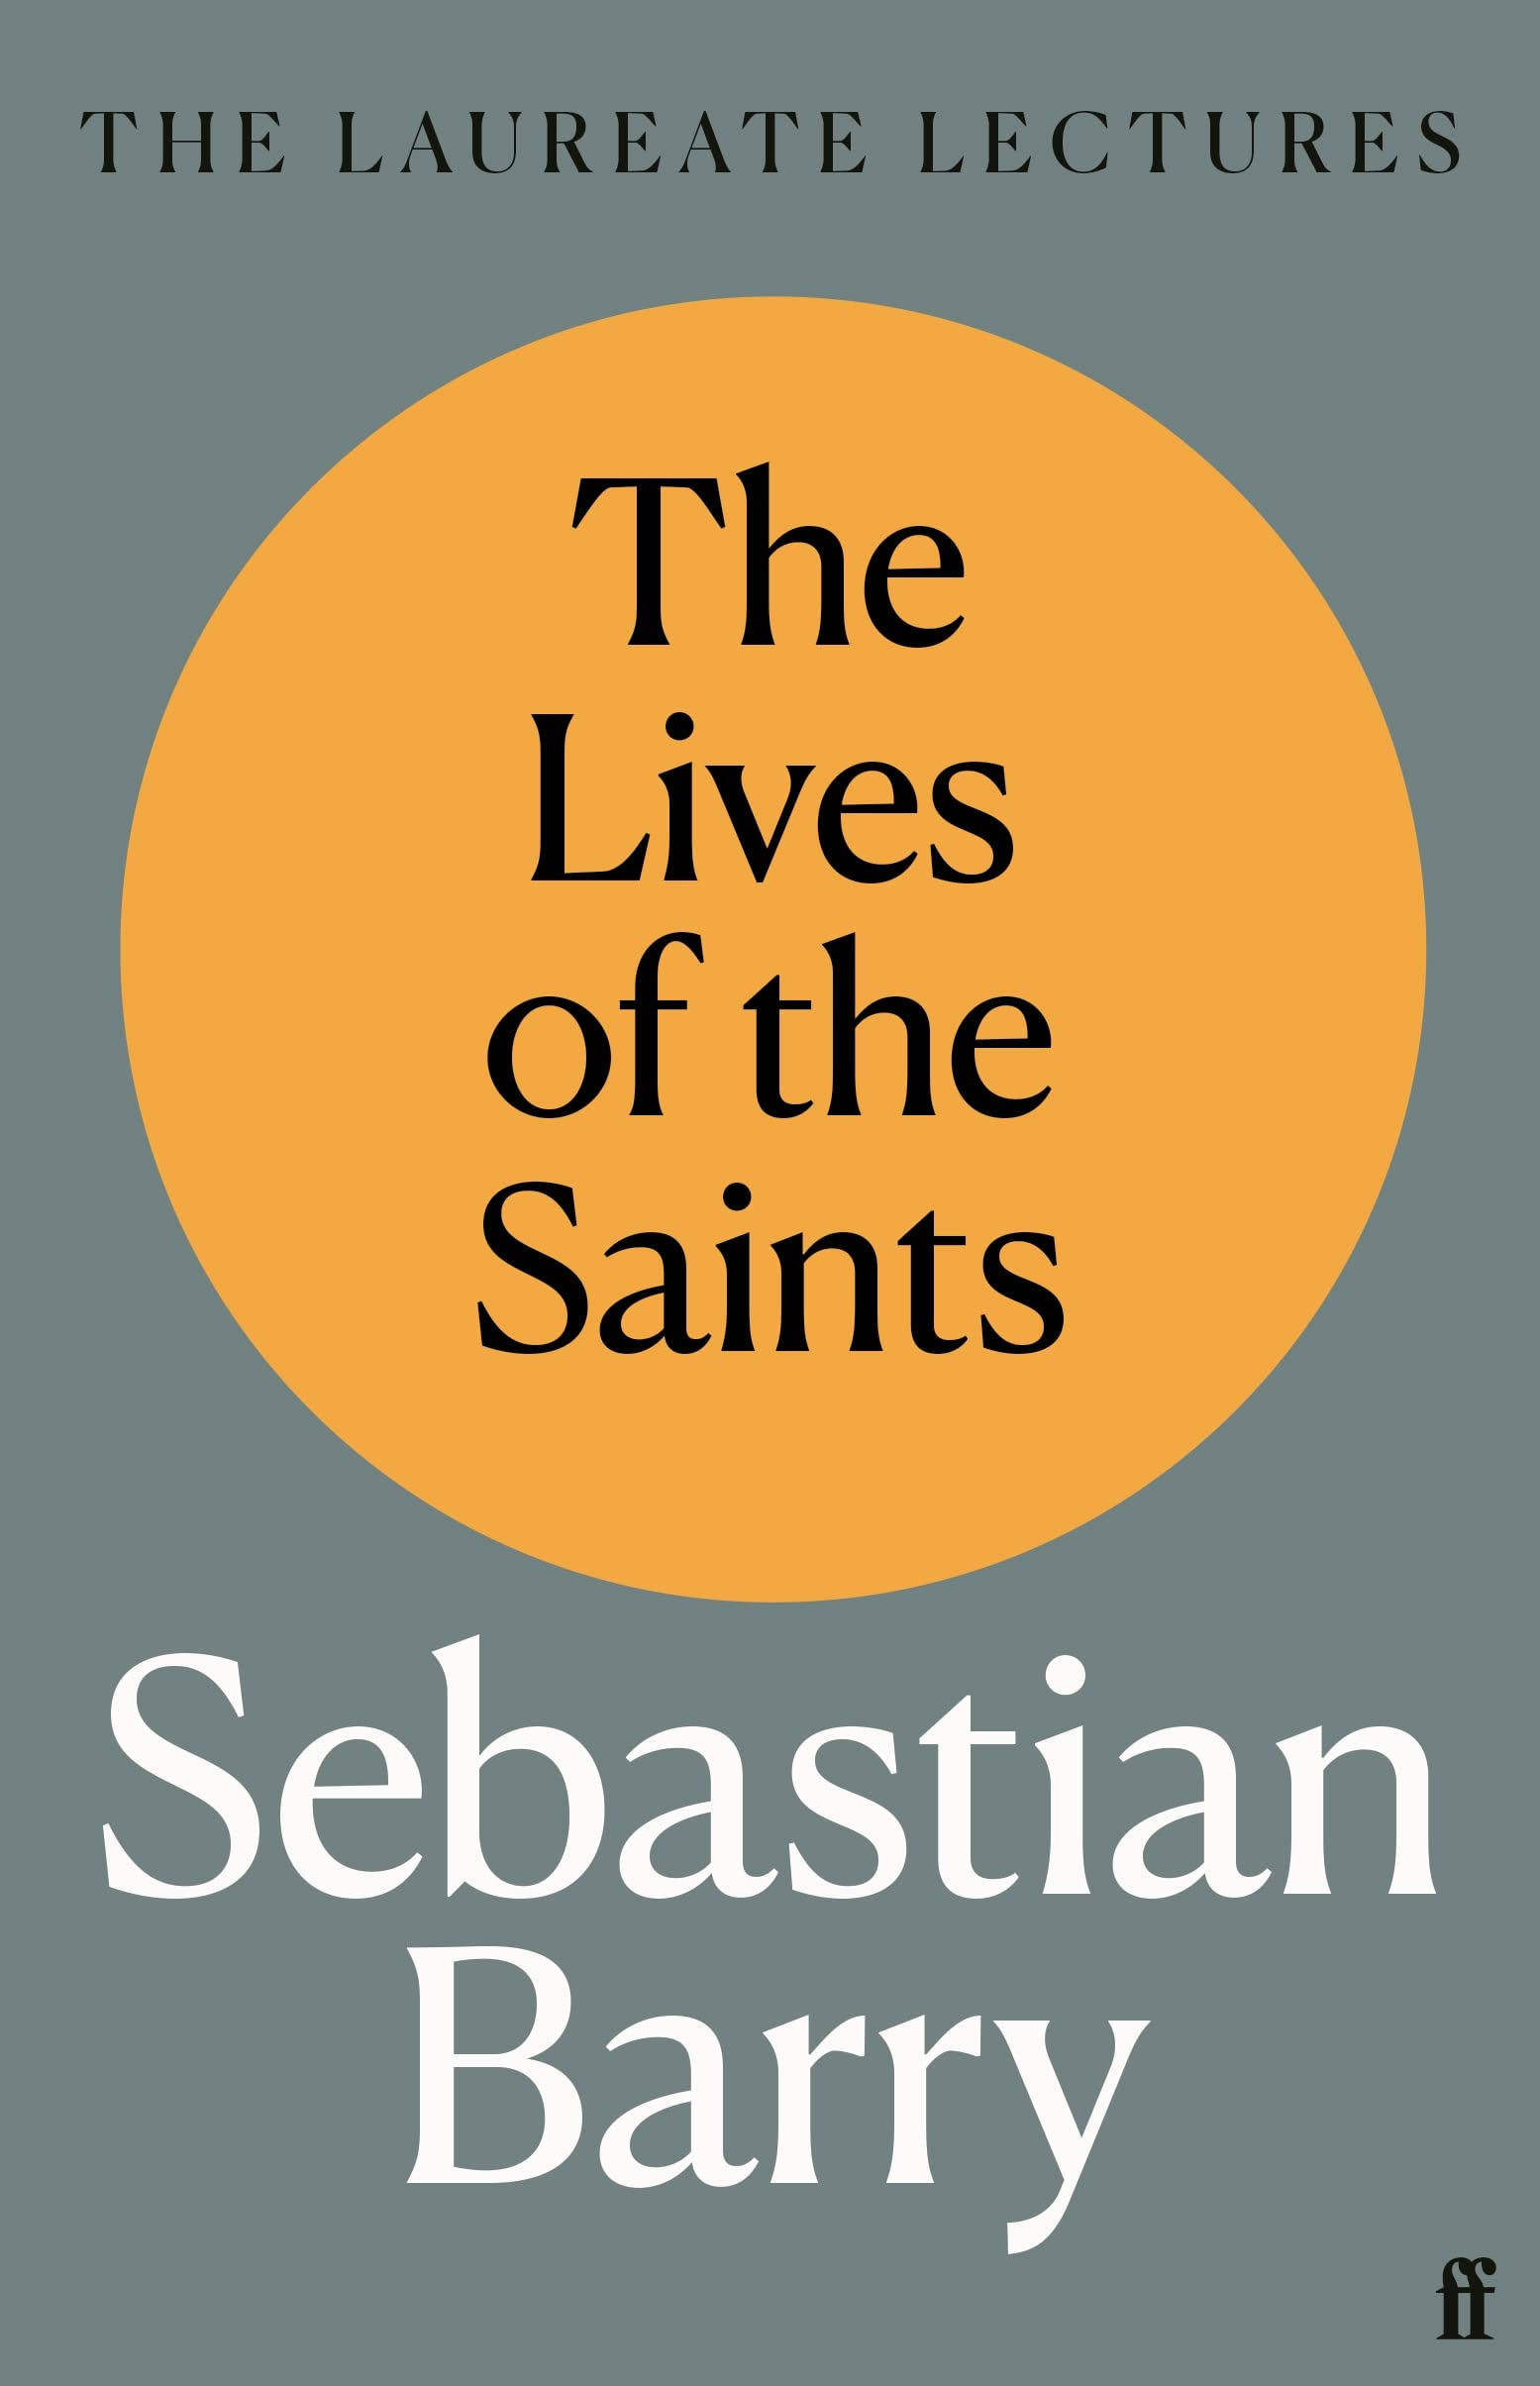 The Lives of The Saints by Sebastian Barry